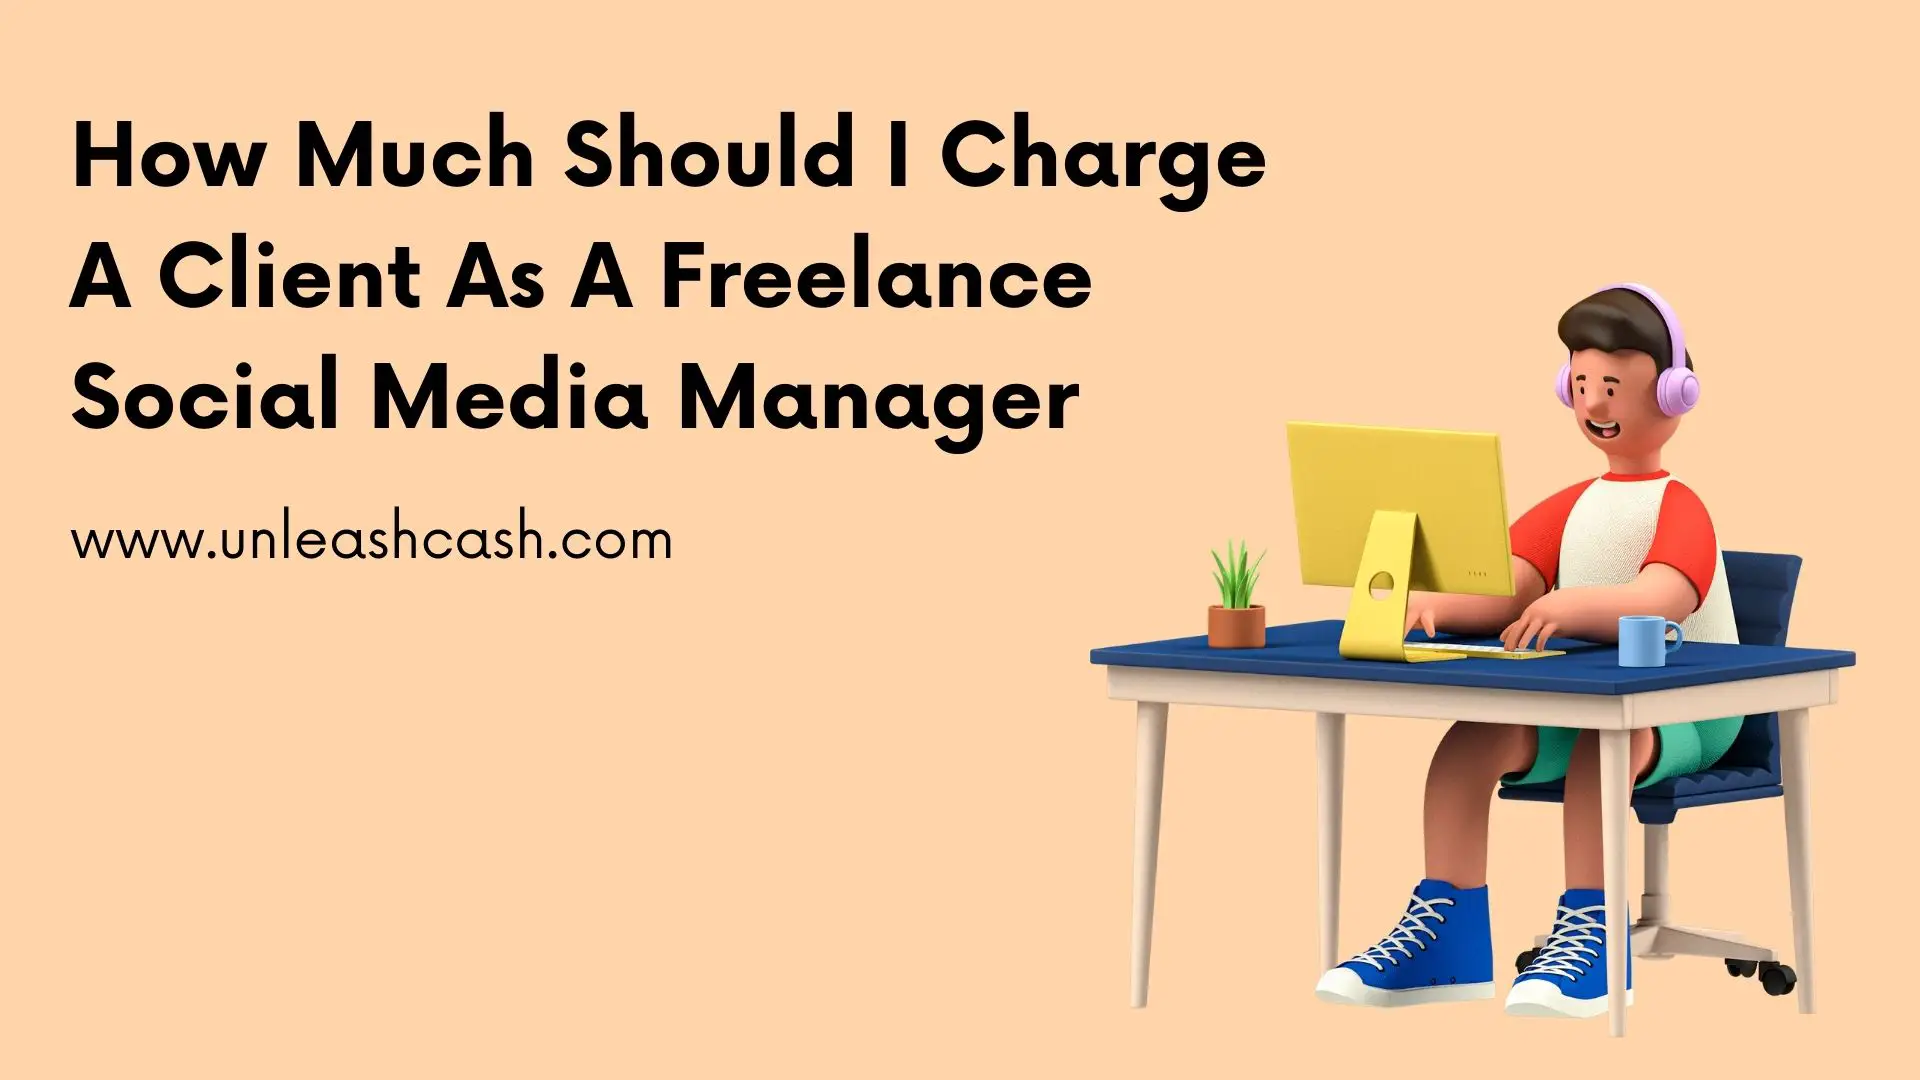 How Much Should I Charge A Client As A Freelance Social Media Manager